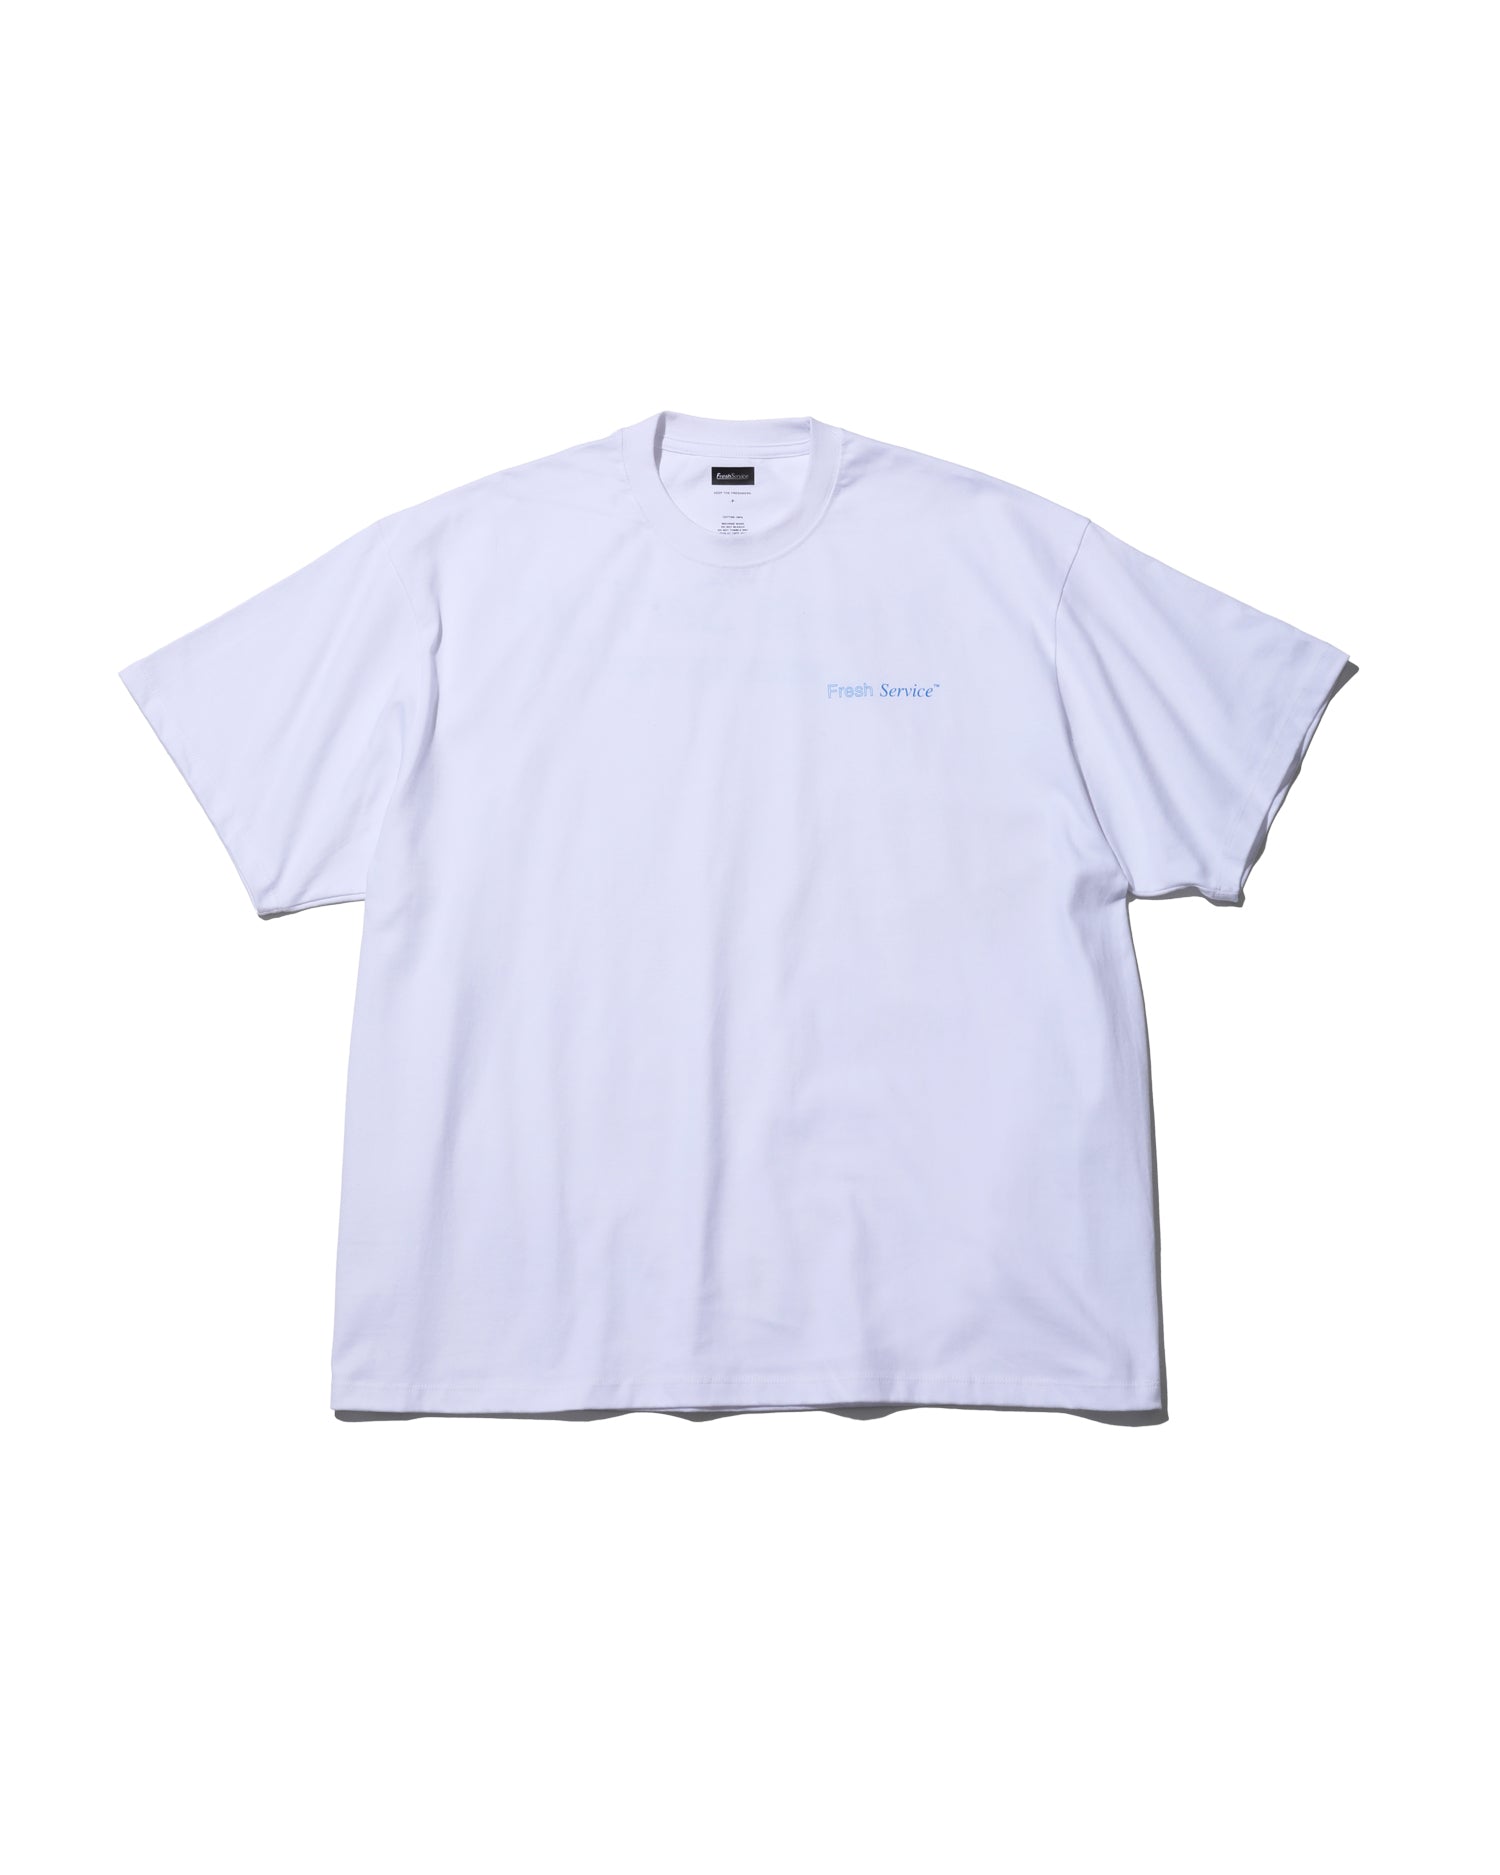 CORPORATE PRINTED S/S TEE ”TM” – FreshService® official site